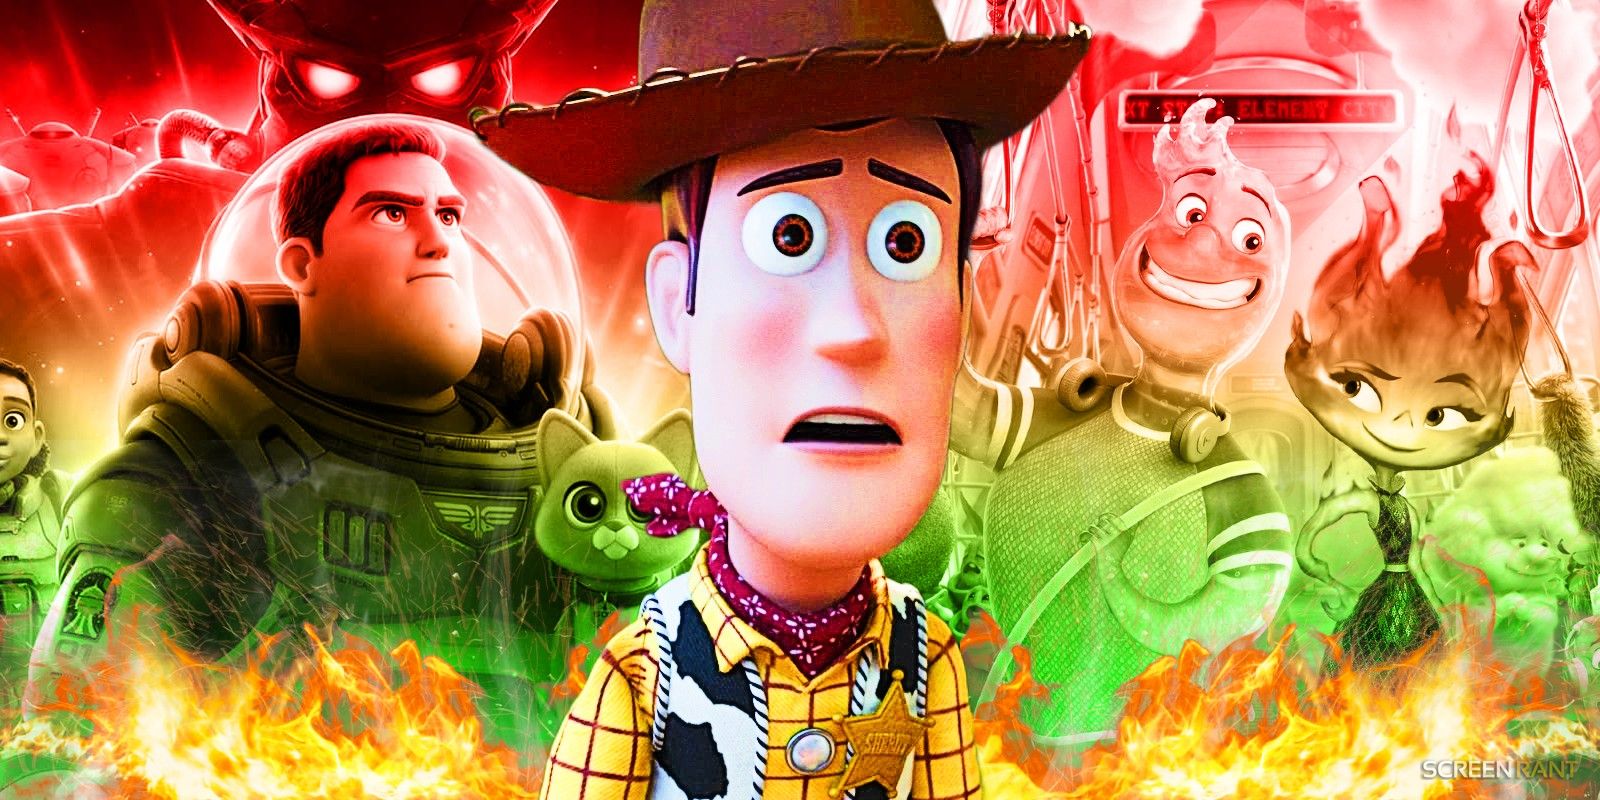 Pixar Movies Box Office After Toy Story 4